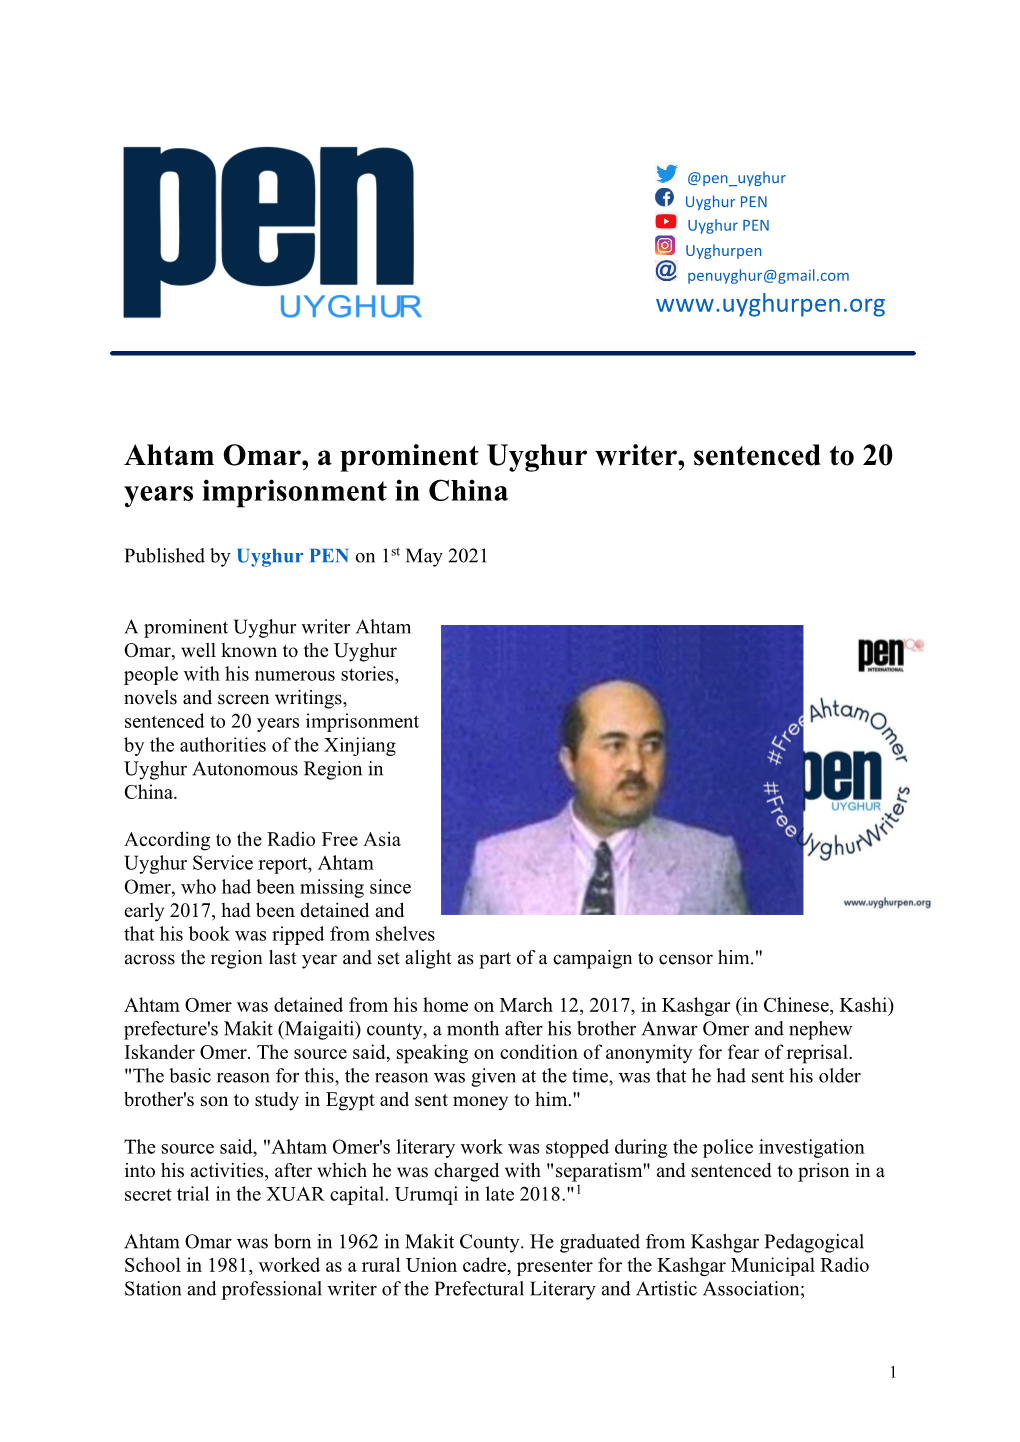 Ahtam Omar, a Prominent Uyghur Writer, Sentenced to 20 Years Imprisonment in China